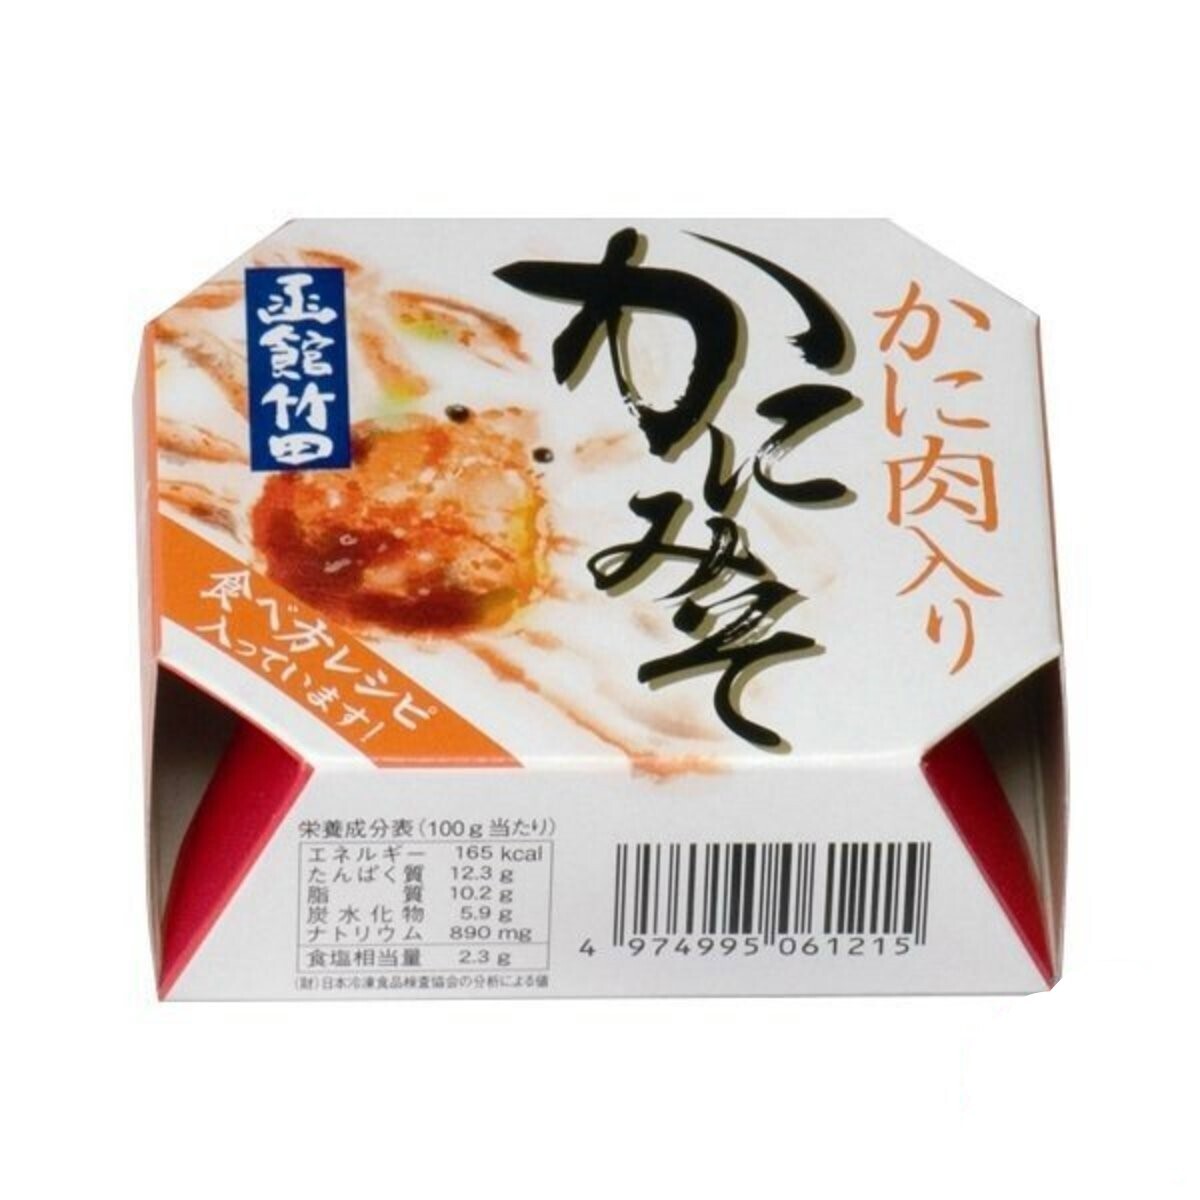 Takeda Shokuhin Crab Miso Paste with Meat (100G)